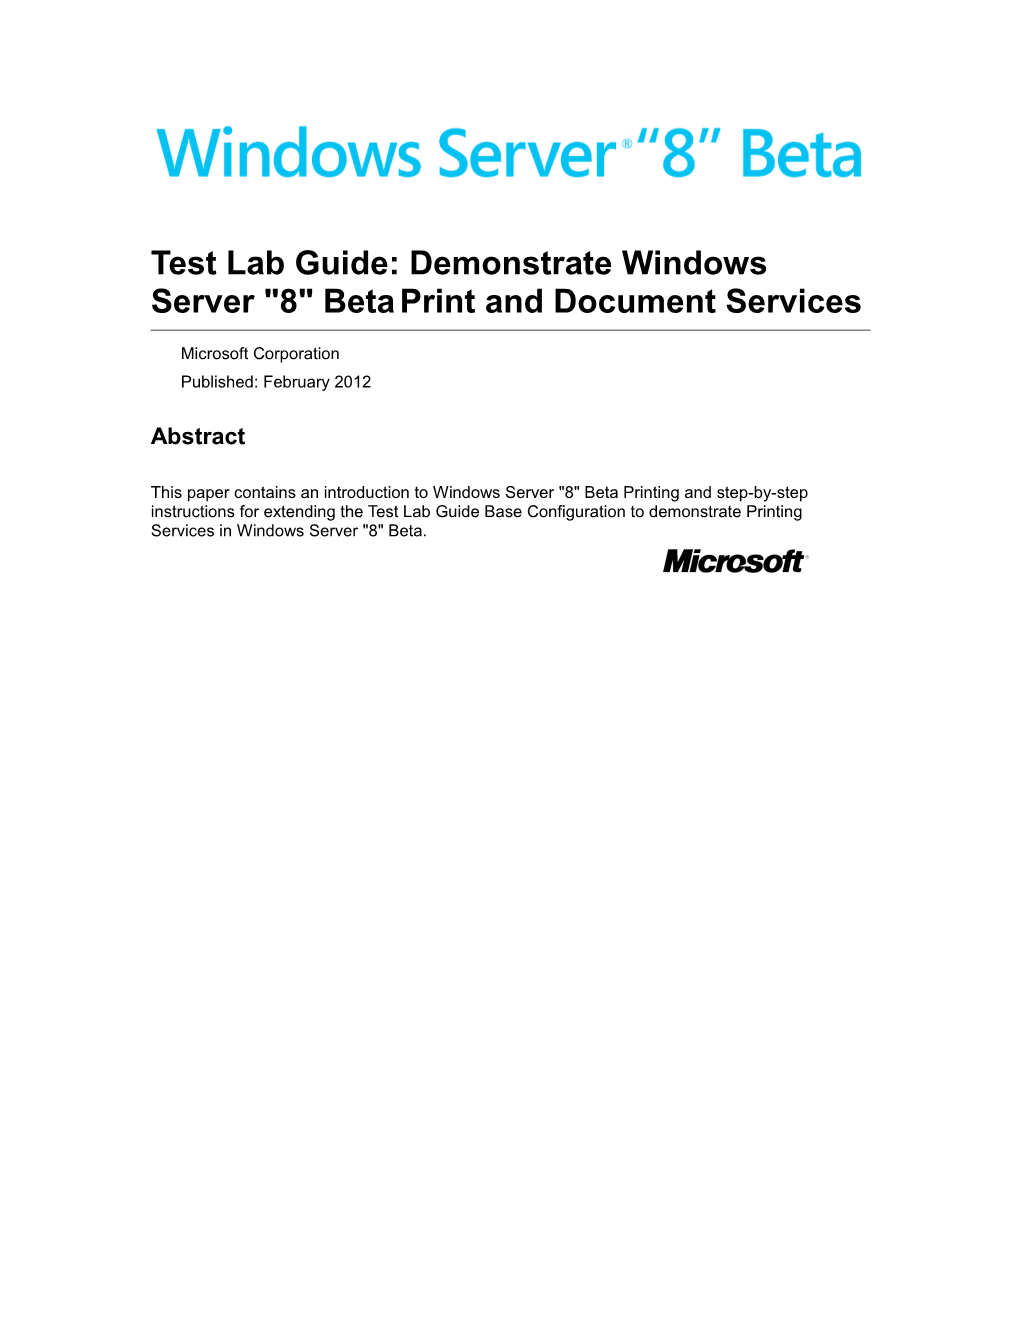 Test Lab Guide: Demonstrate Windows Server 8 Betaprint and Document Services